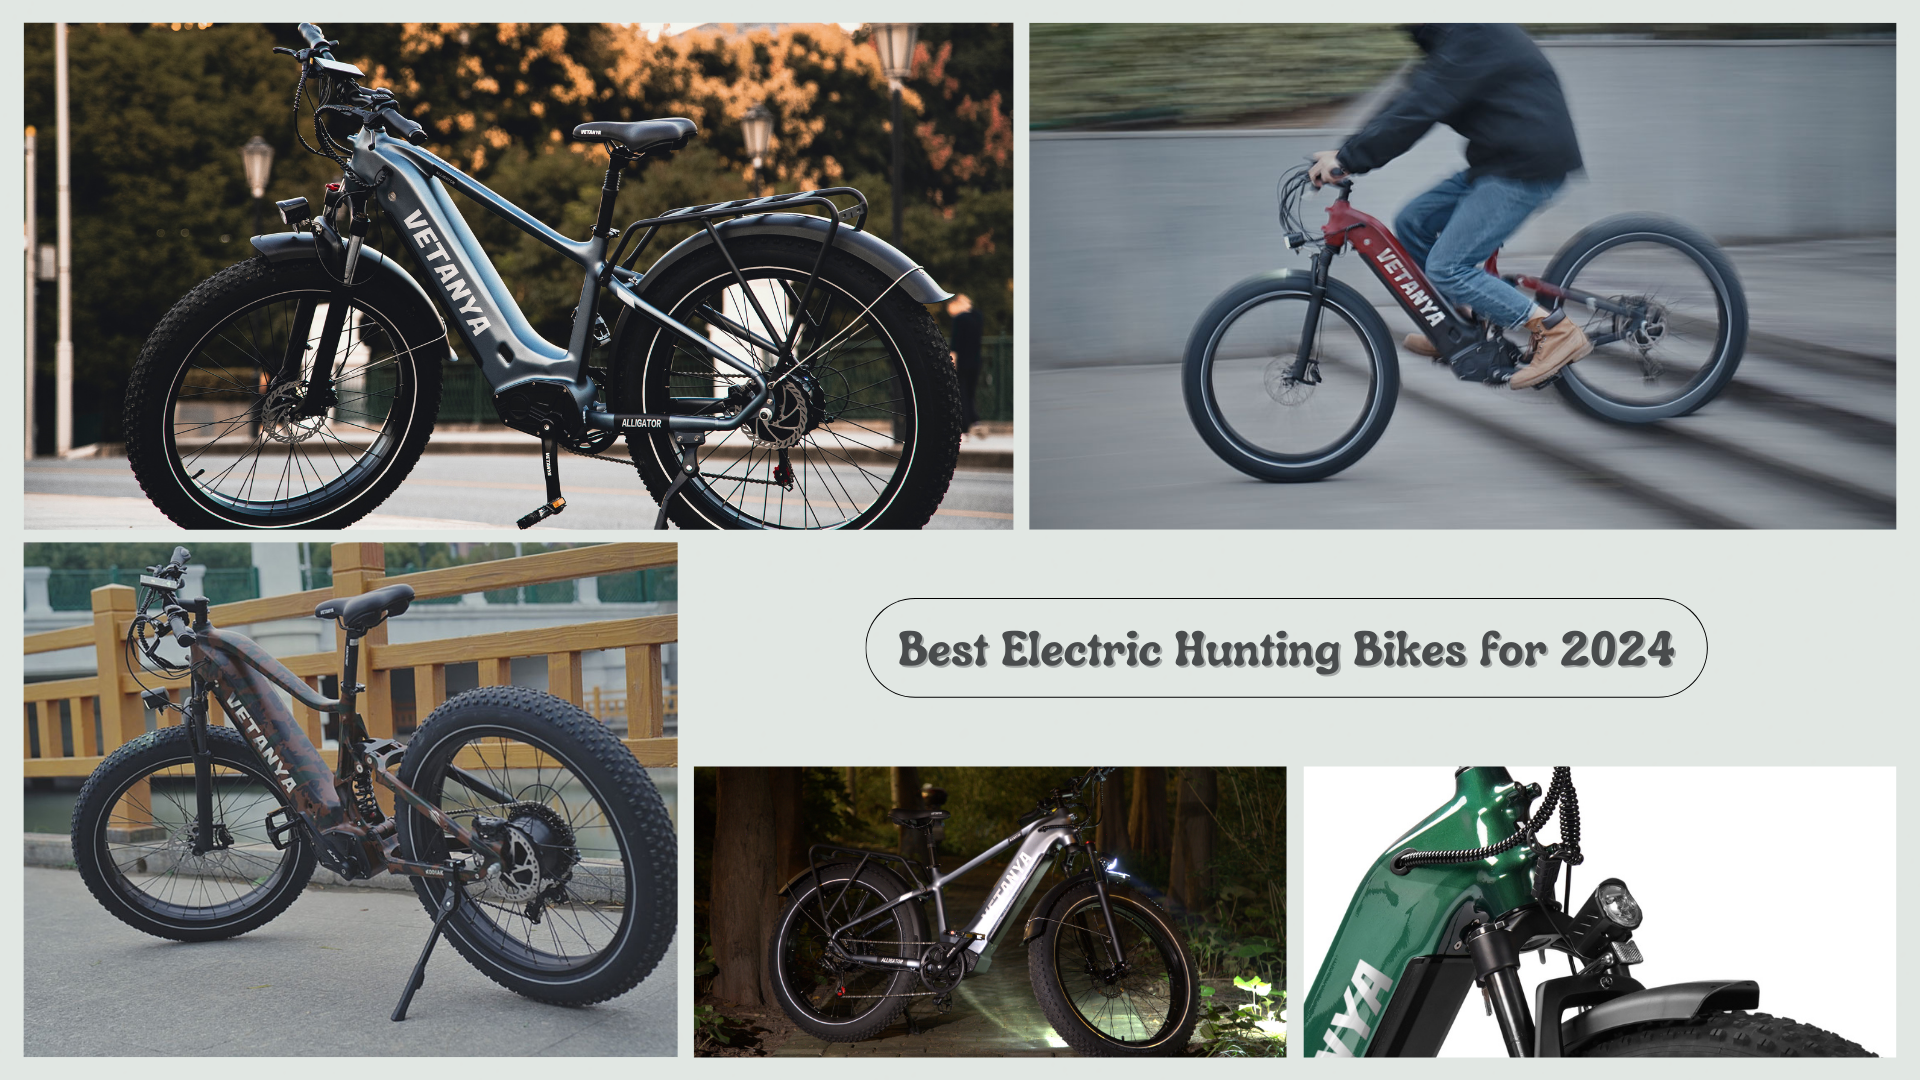 The Best Electric Hunting Bikes for 2024